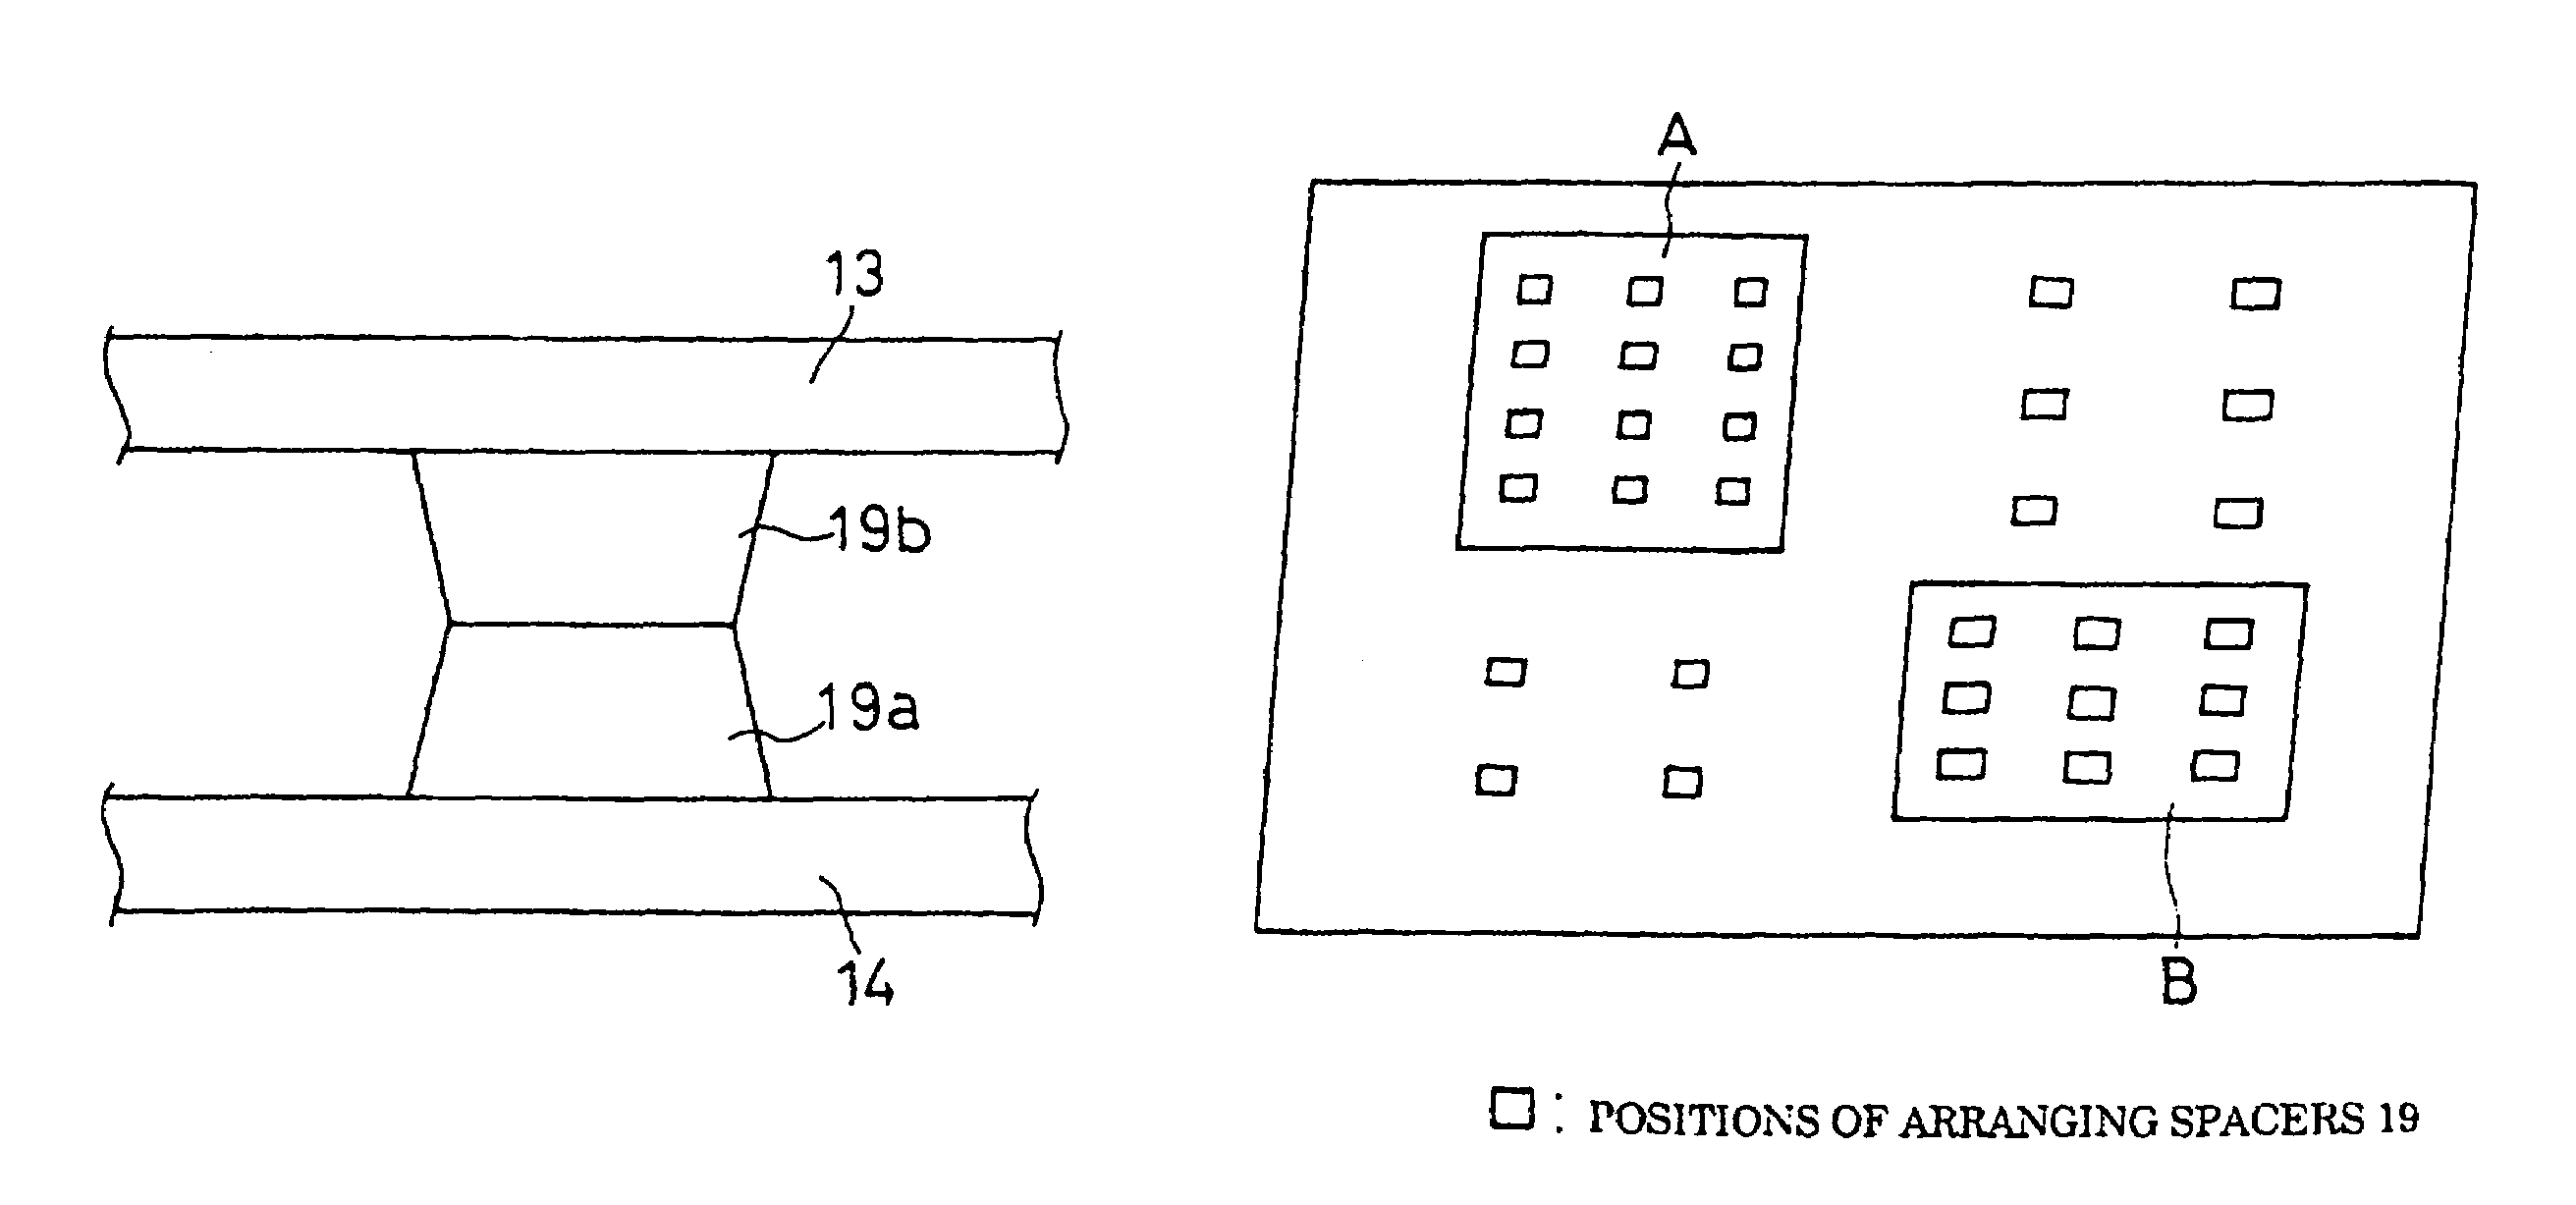 Touch sensor type liquid crystal display having a plurality of spacers, each comprising two members adapted to slide relative to each other in response to a contact force